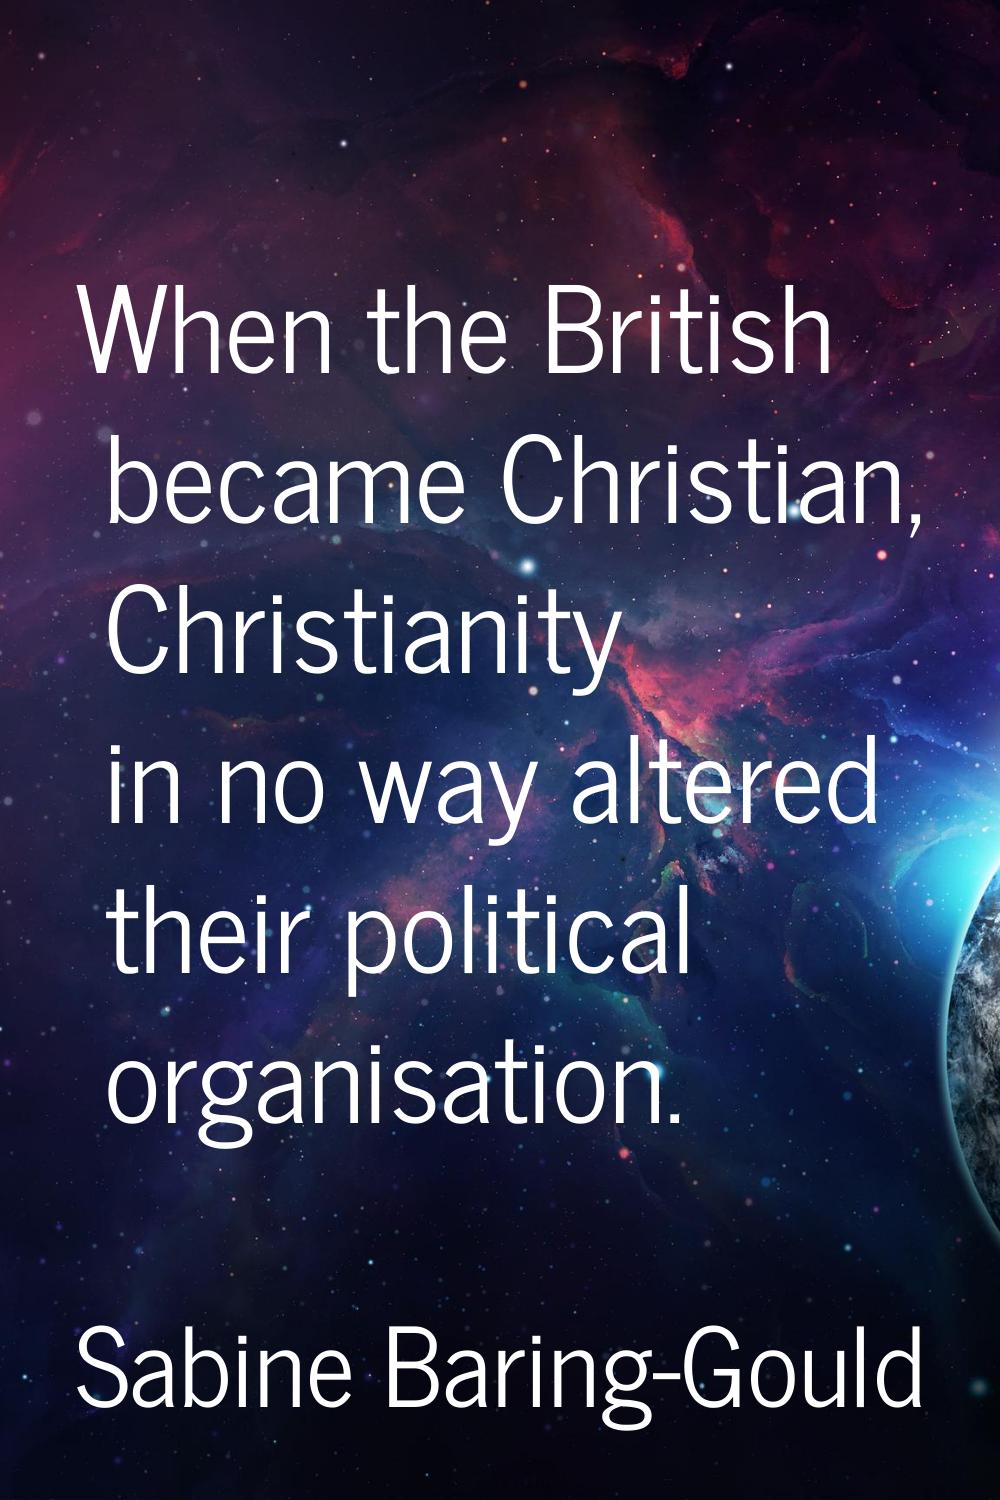 When the British became Christian, Christianity in no way altered their political organisation.